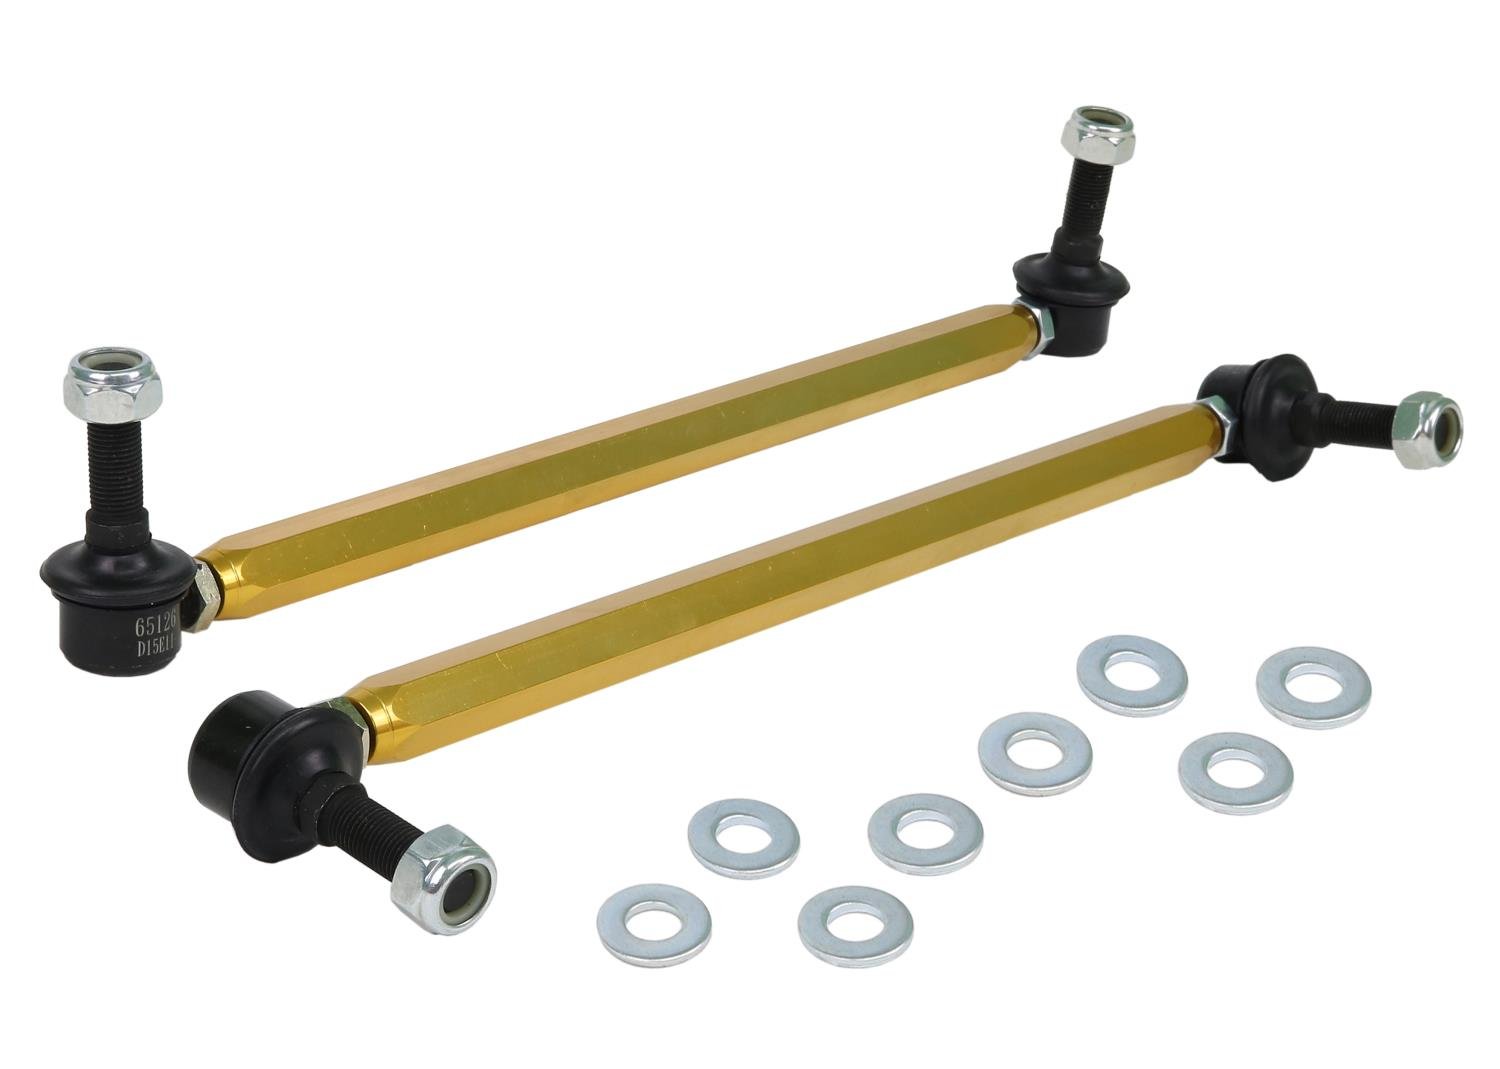 KLC201 Front Sway Bar Links for 2010-2016 Hyundai Genesis Coupe